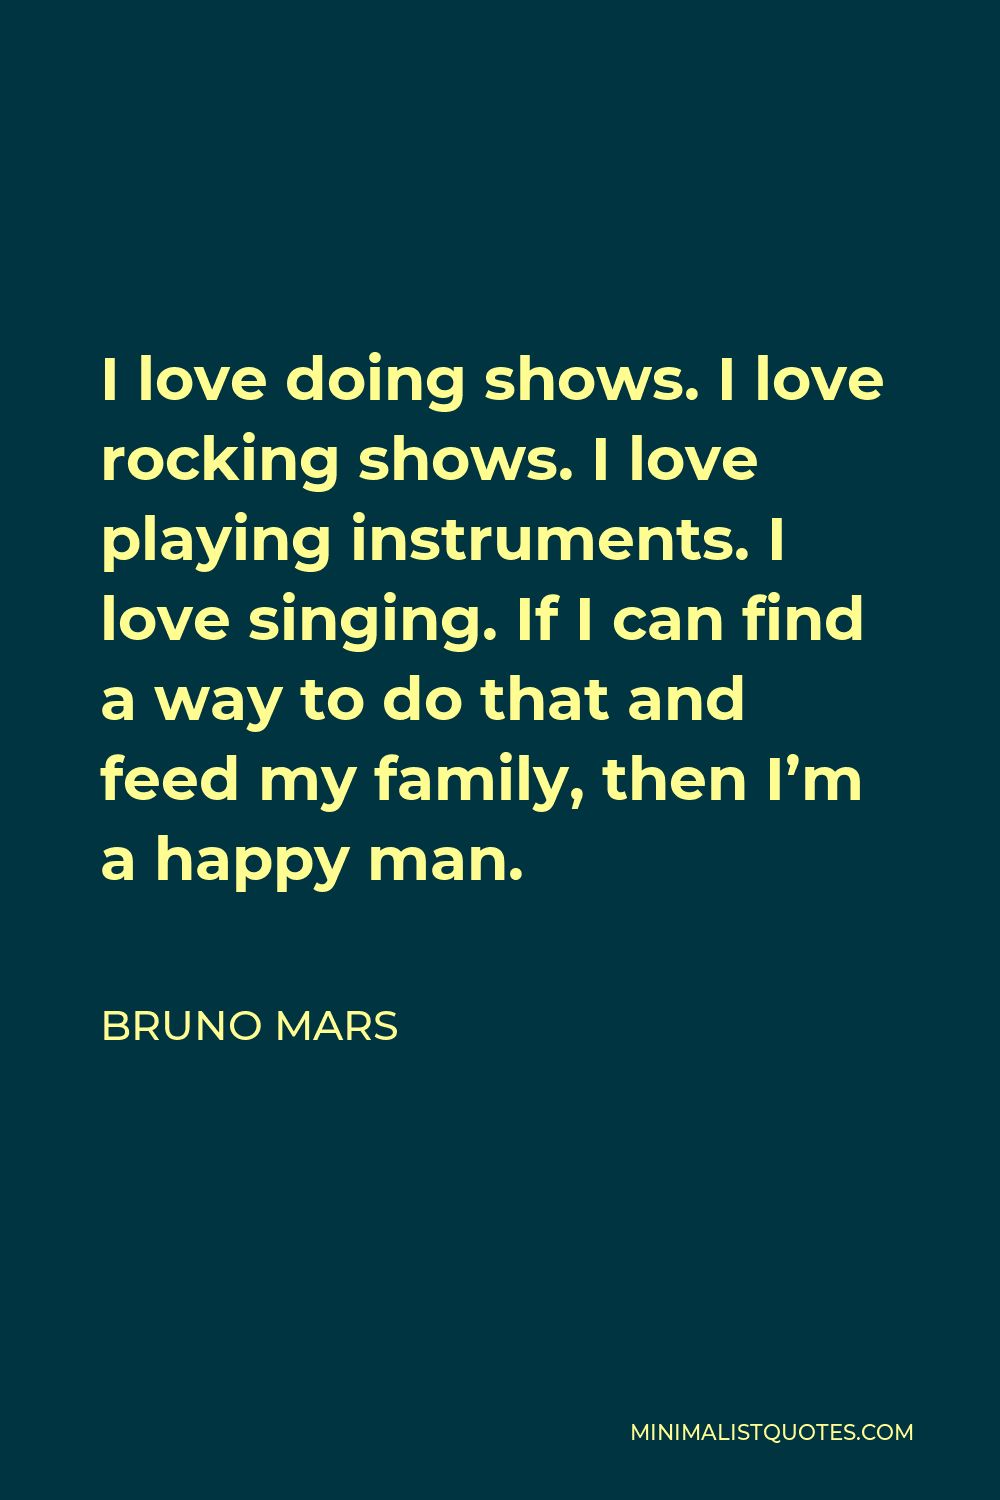 Bruno Mars Quote - I love doing shows. I love rocking shows. I love playing instruments. I love singing. If I can find a way to do that and feed my family, then I’m a happy man.